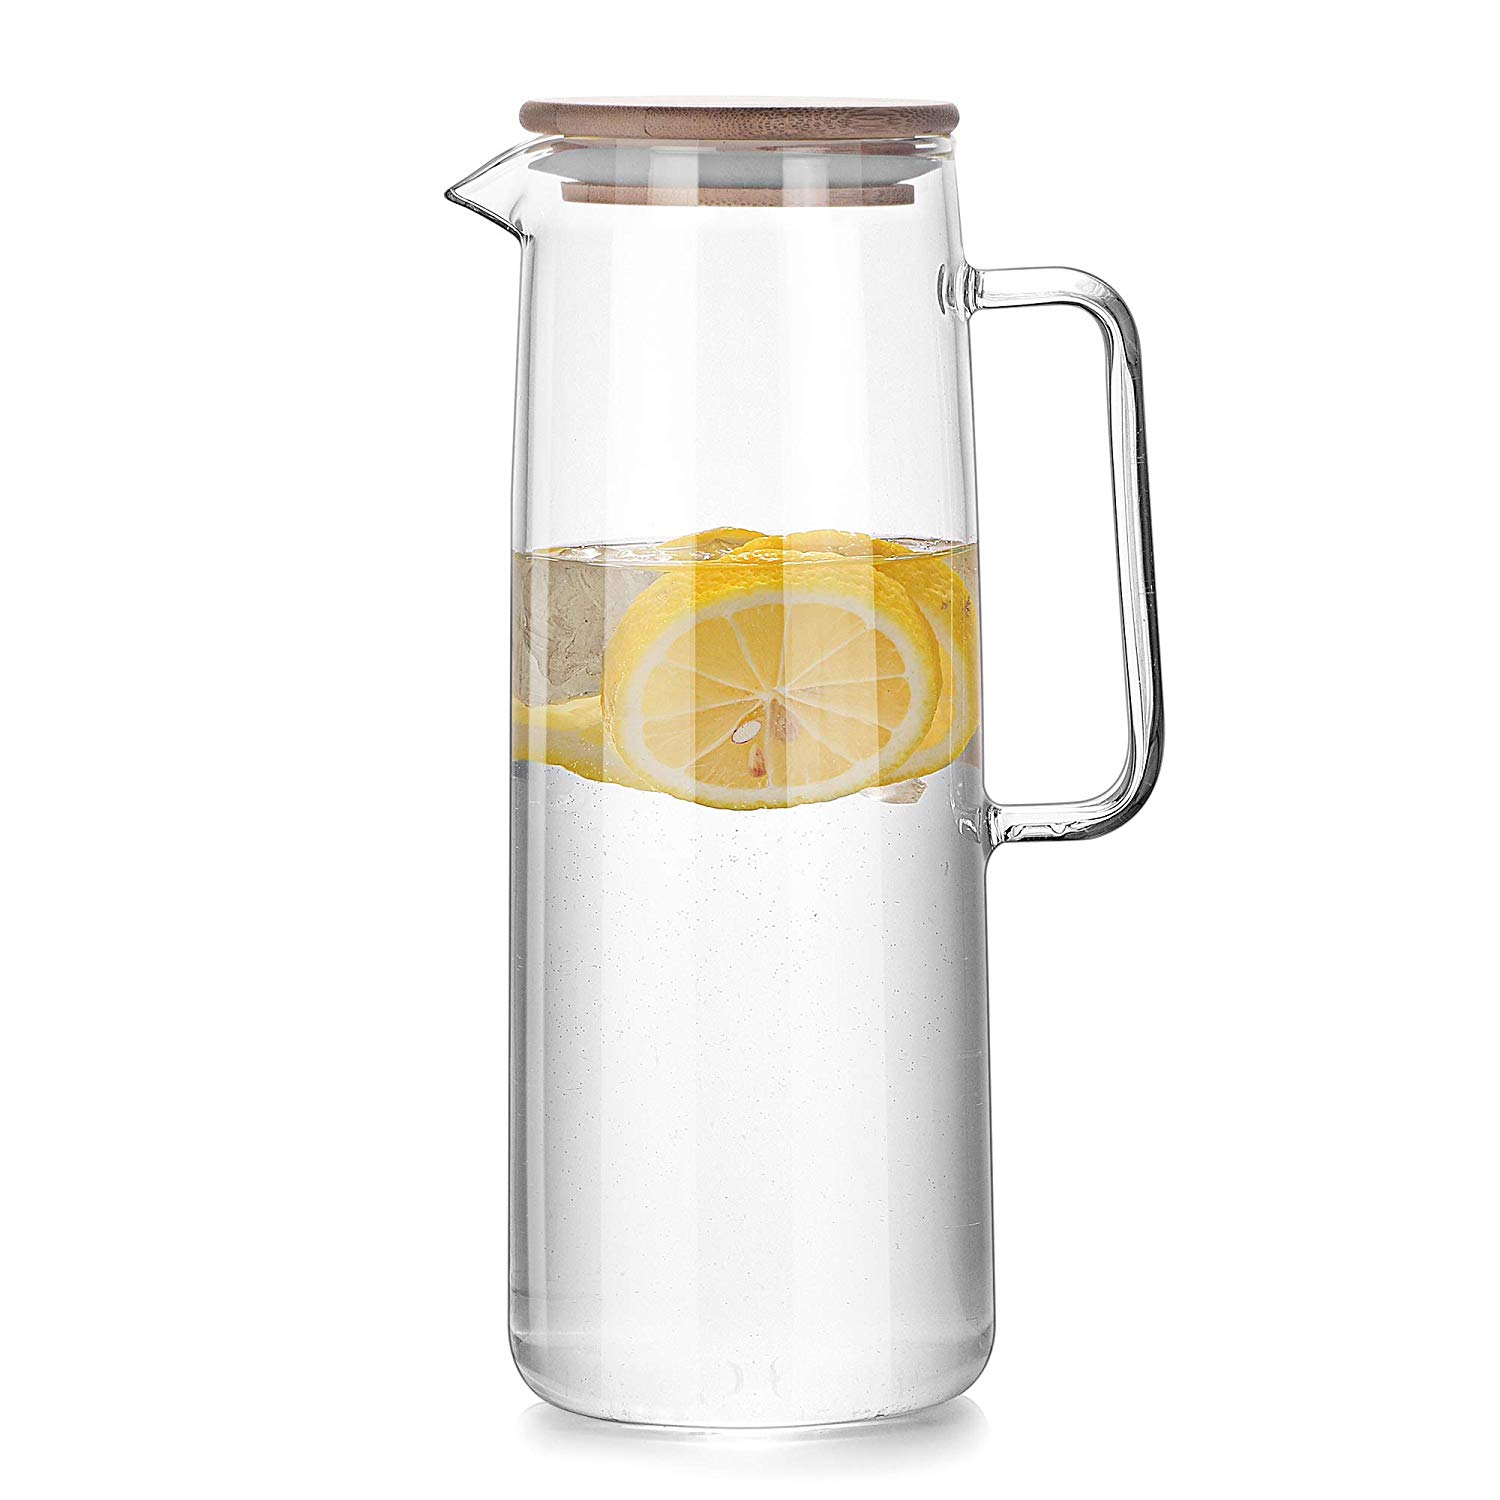 Hot/Cold Glass Carafe